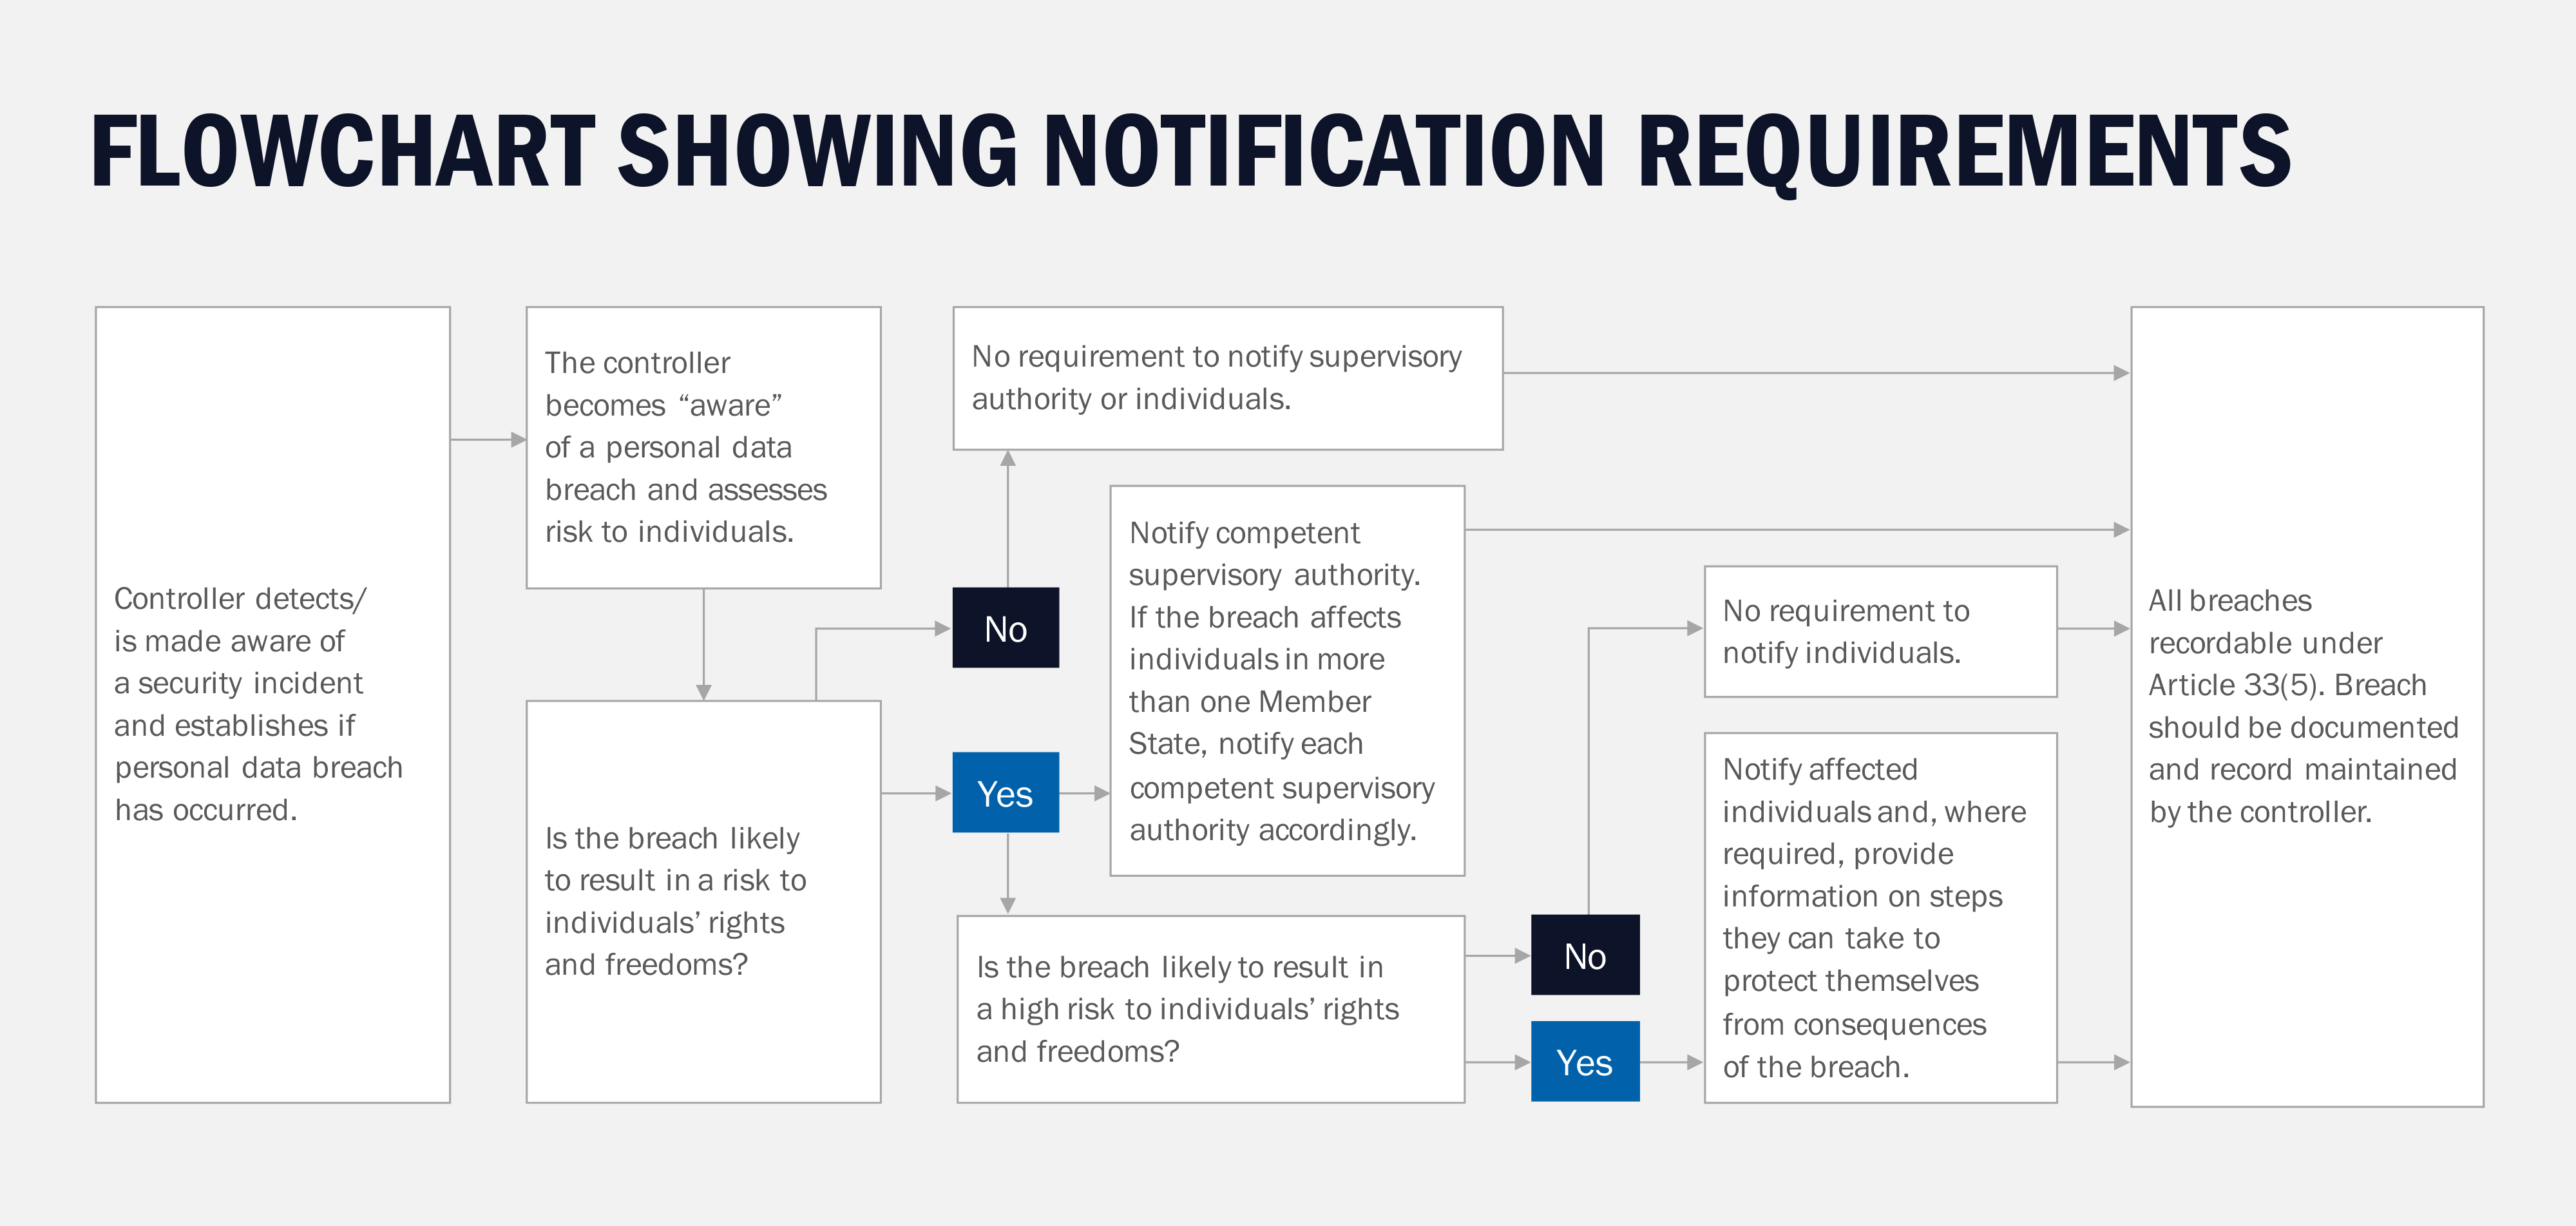 State Data Breach Notification Laws Chart